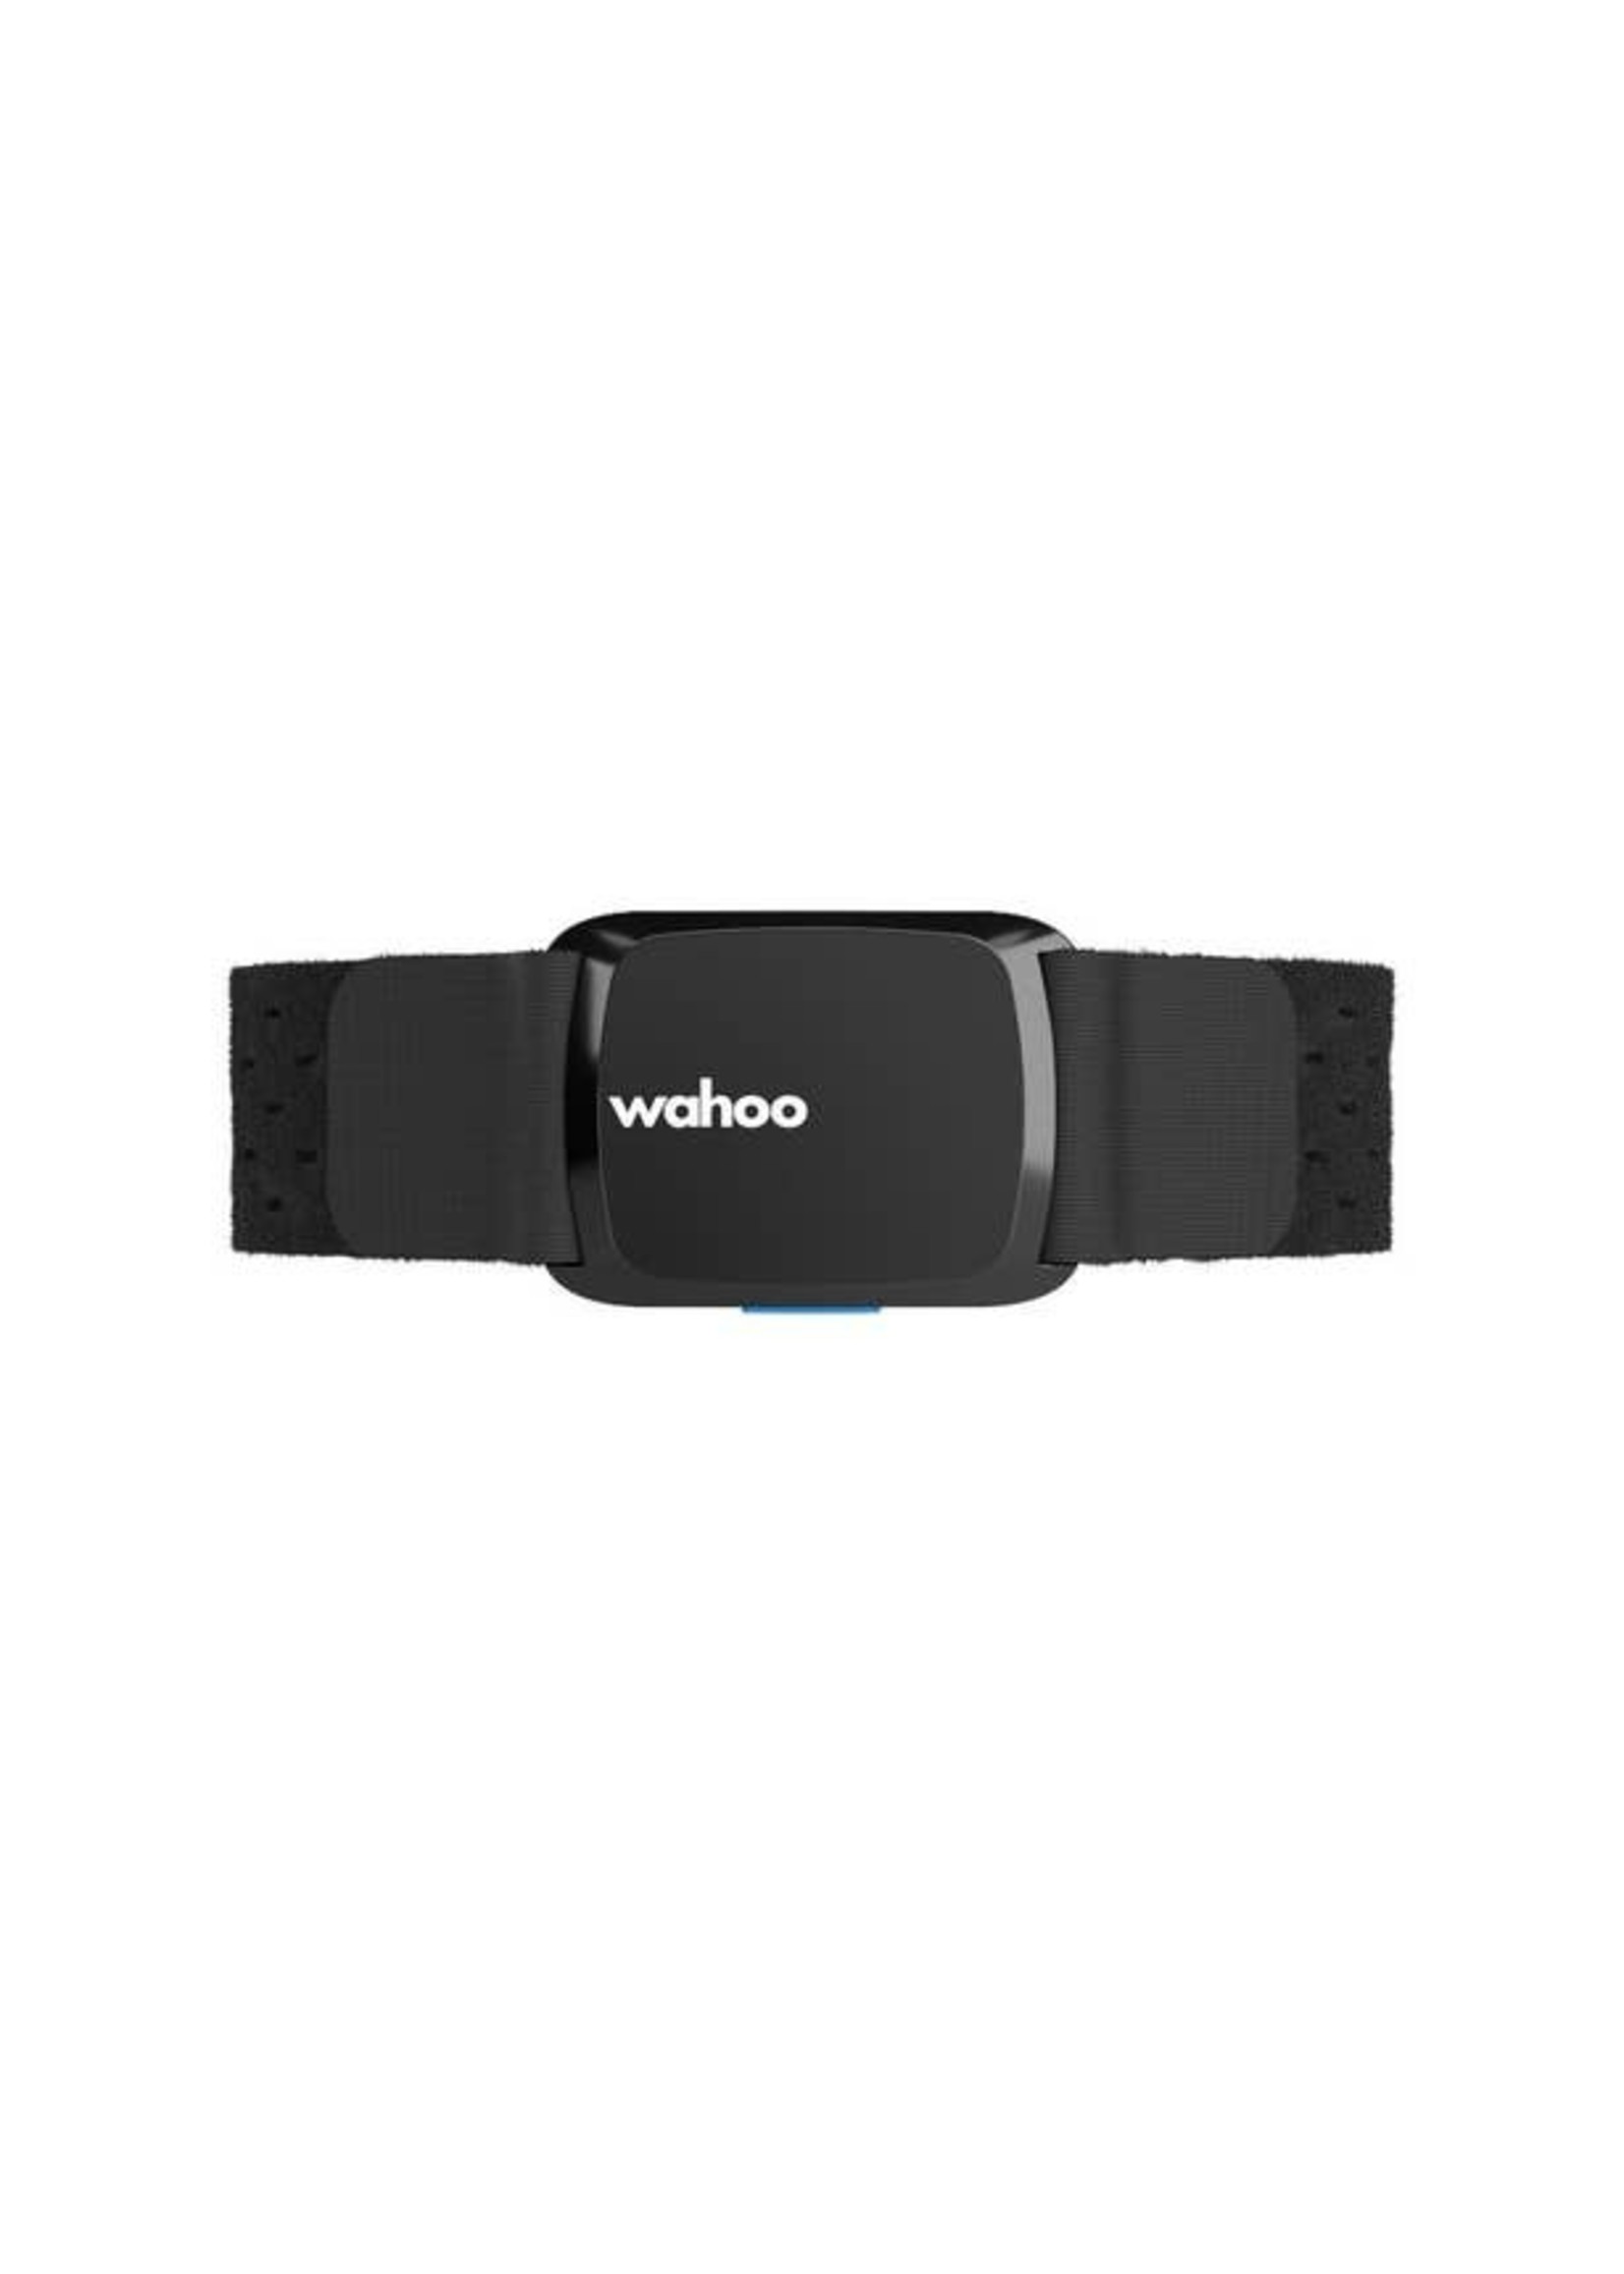 Wahoo TICKR FIT Heart Rate